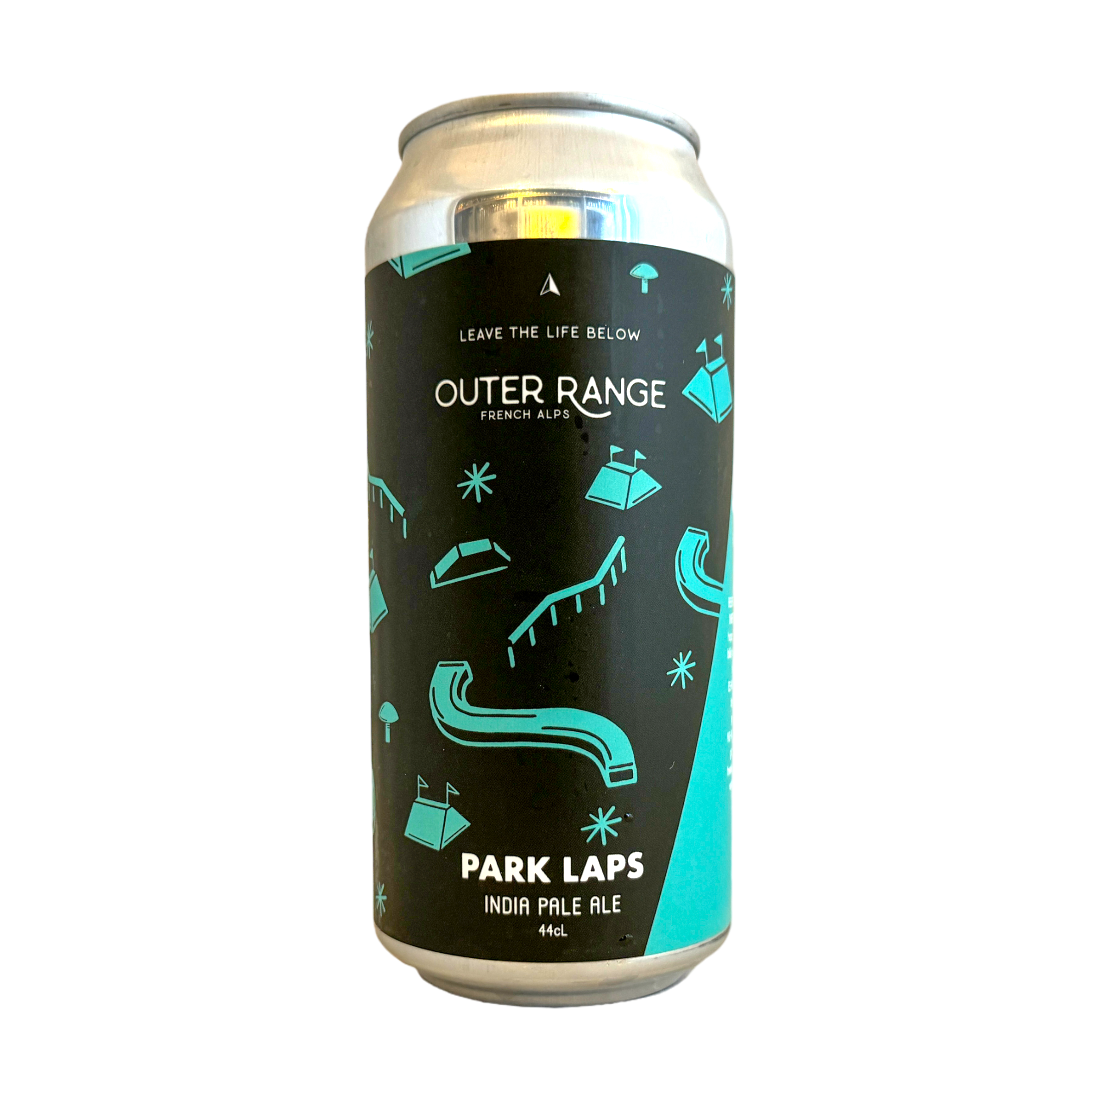 Park Laps IPA Brasserie Outer Range French Alps - Bieronomy